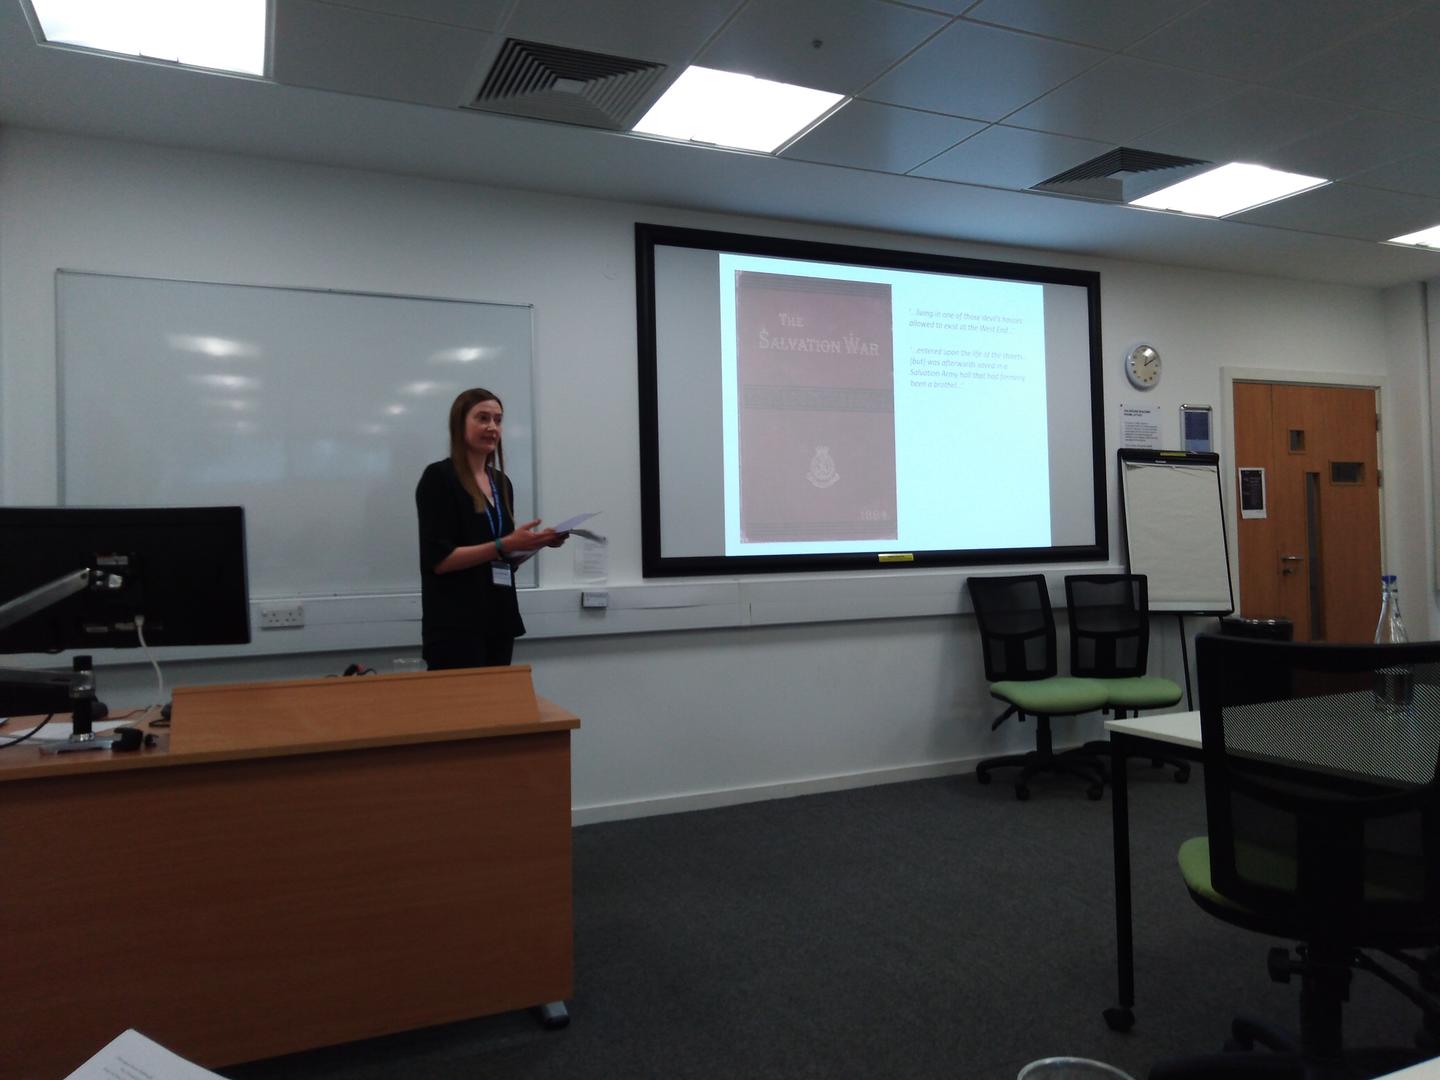 Ruth Macdonald presenting her paper ‘Rescuing the “Fallen” Woman by Revisiting the Archives’, BAVS Conference, 2019